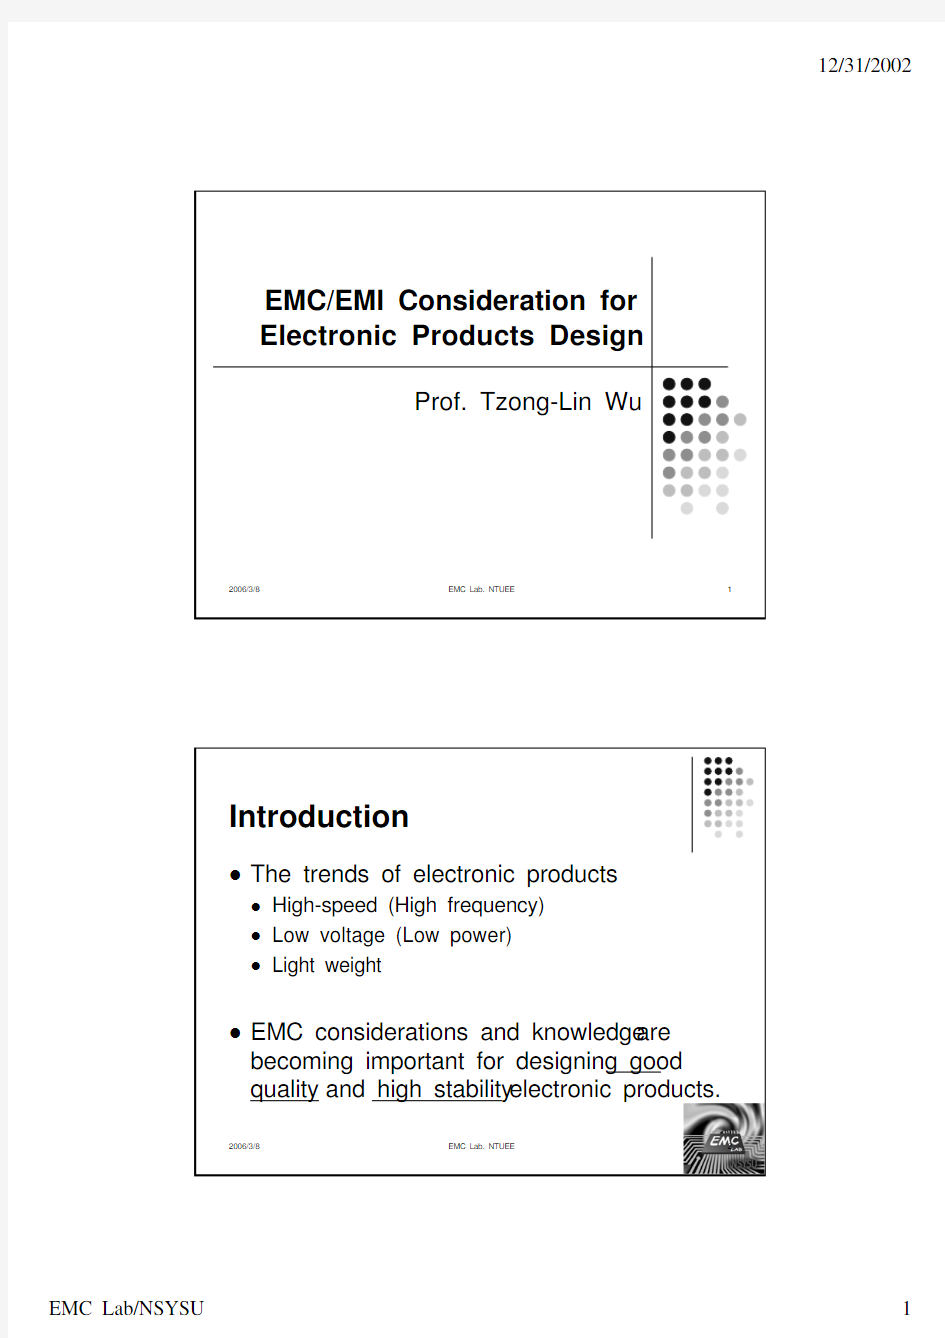 EMC_EMI Consideration for electronic products design